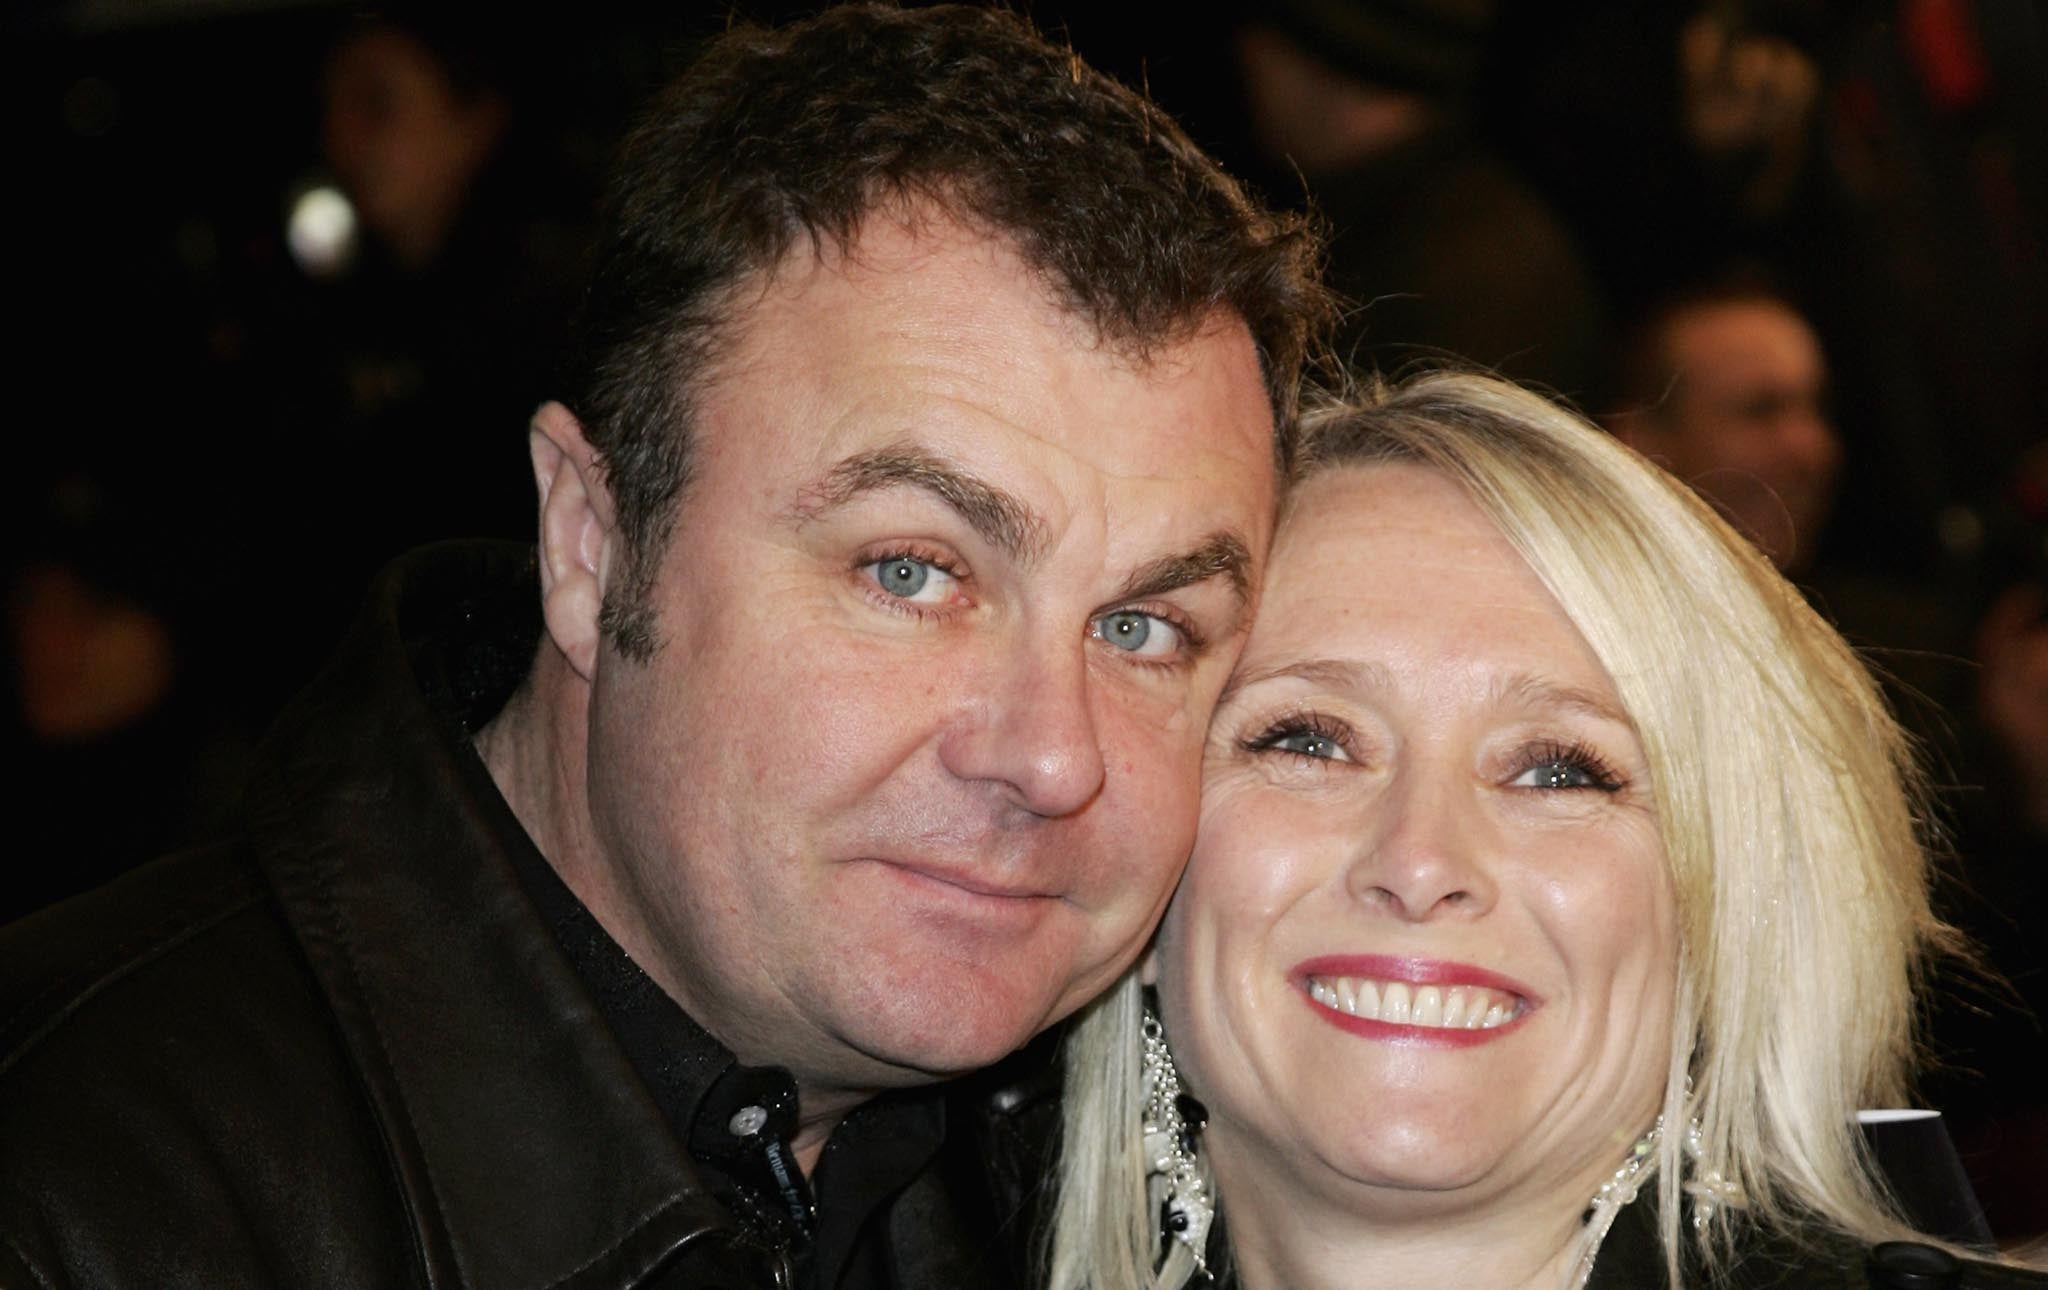 Paul Ross with his wife Jackie at the British Comedy Awards 2006